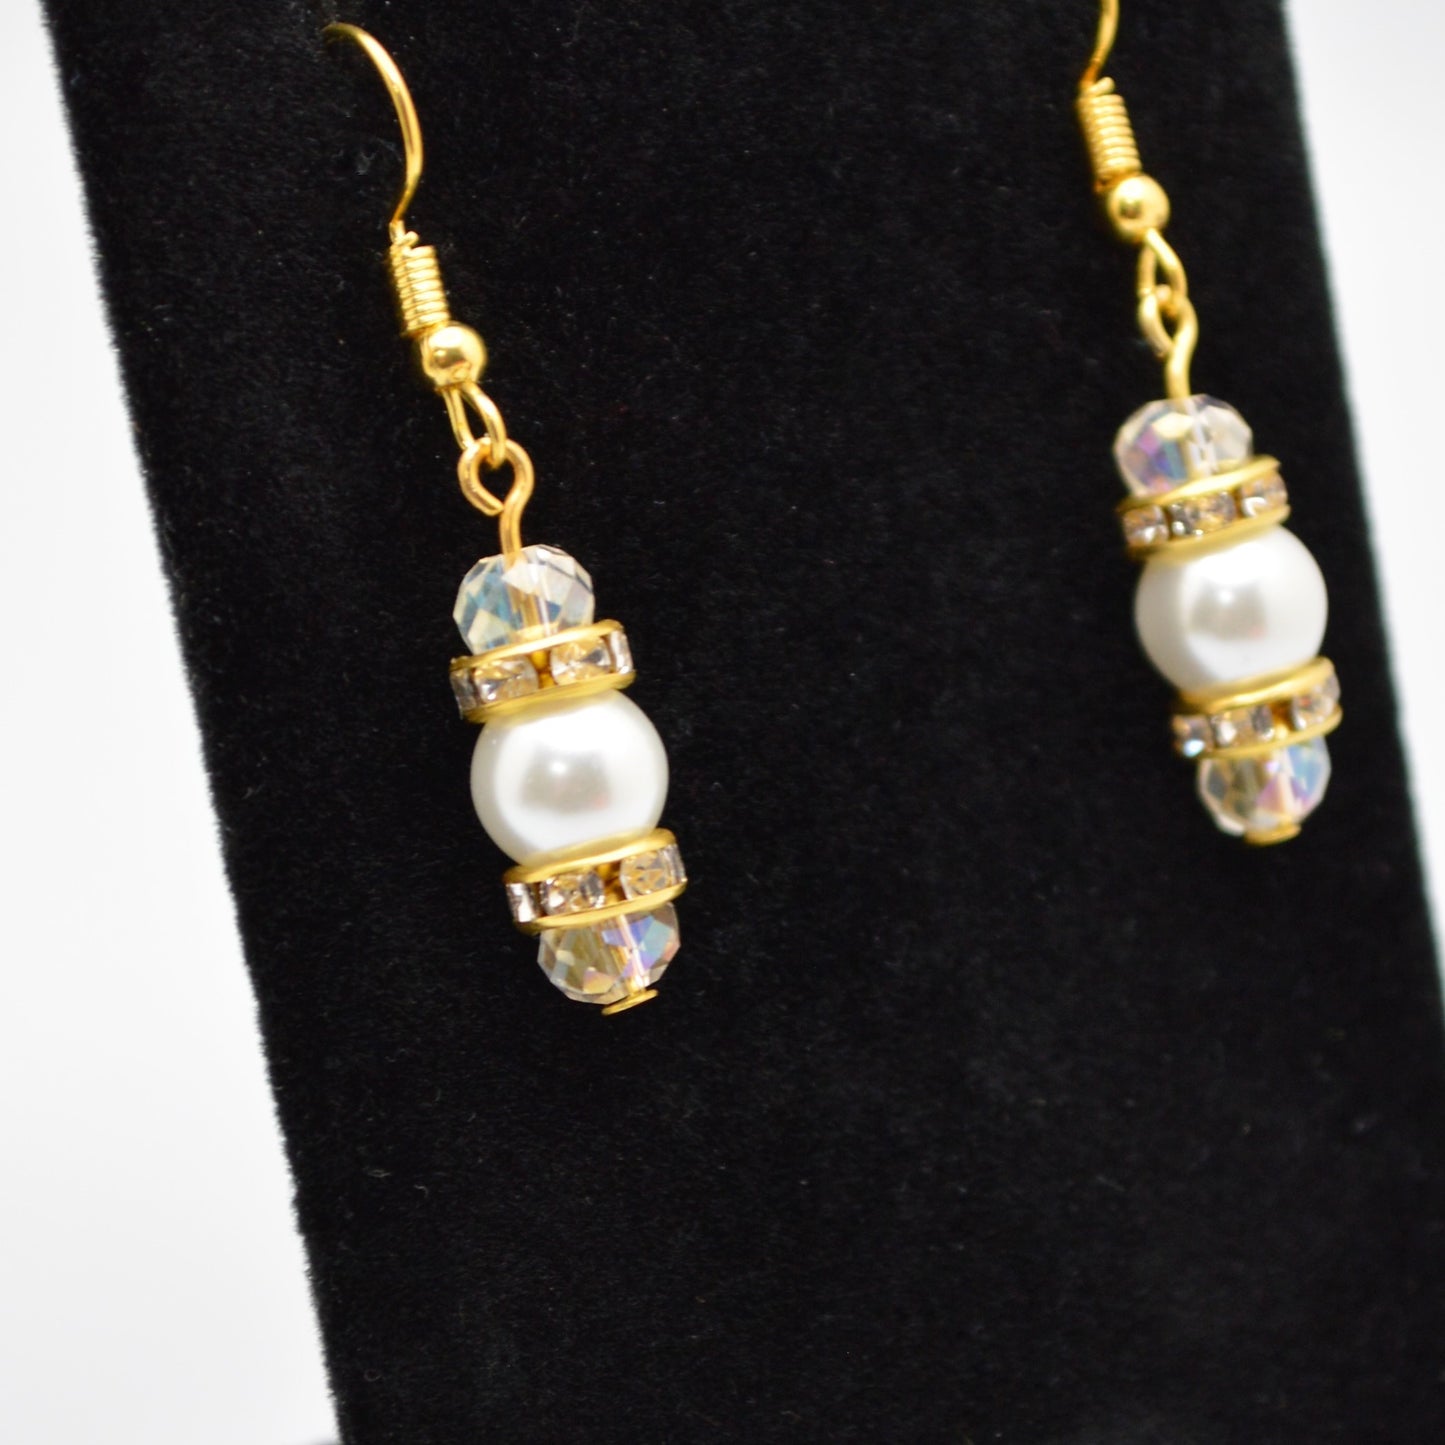 White Glass Pearl and Crystal Earrings (8mm Pearls with Gold Hooks)